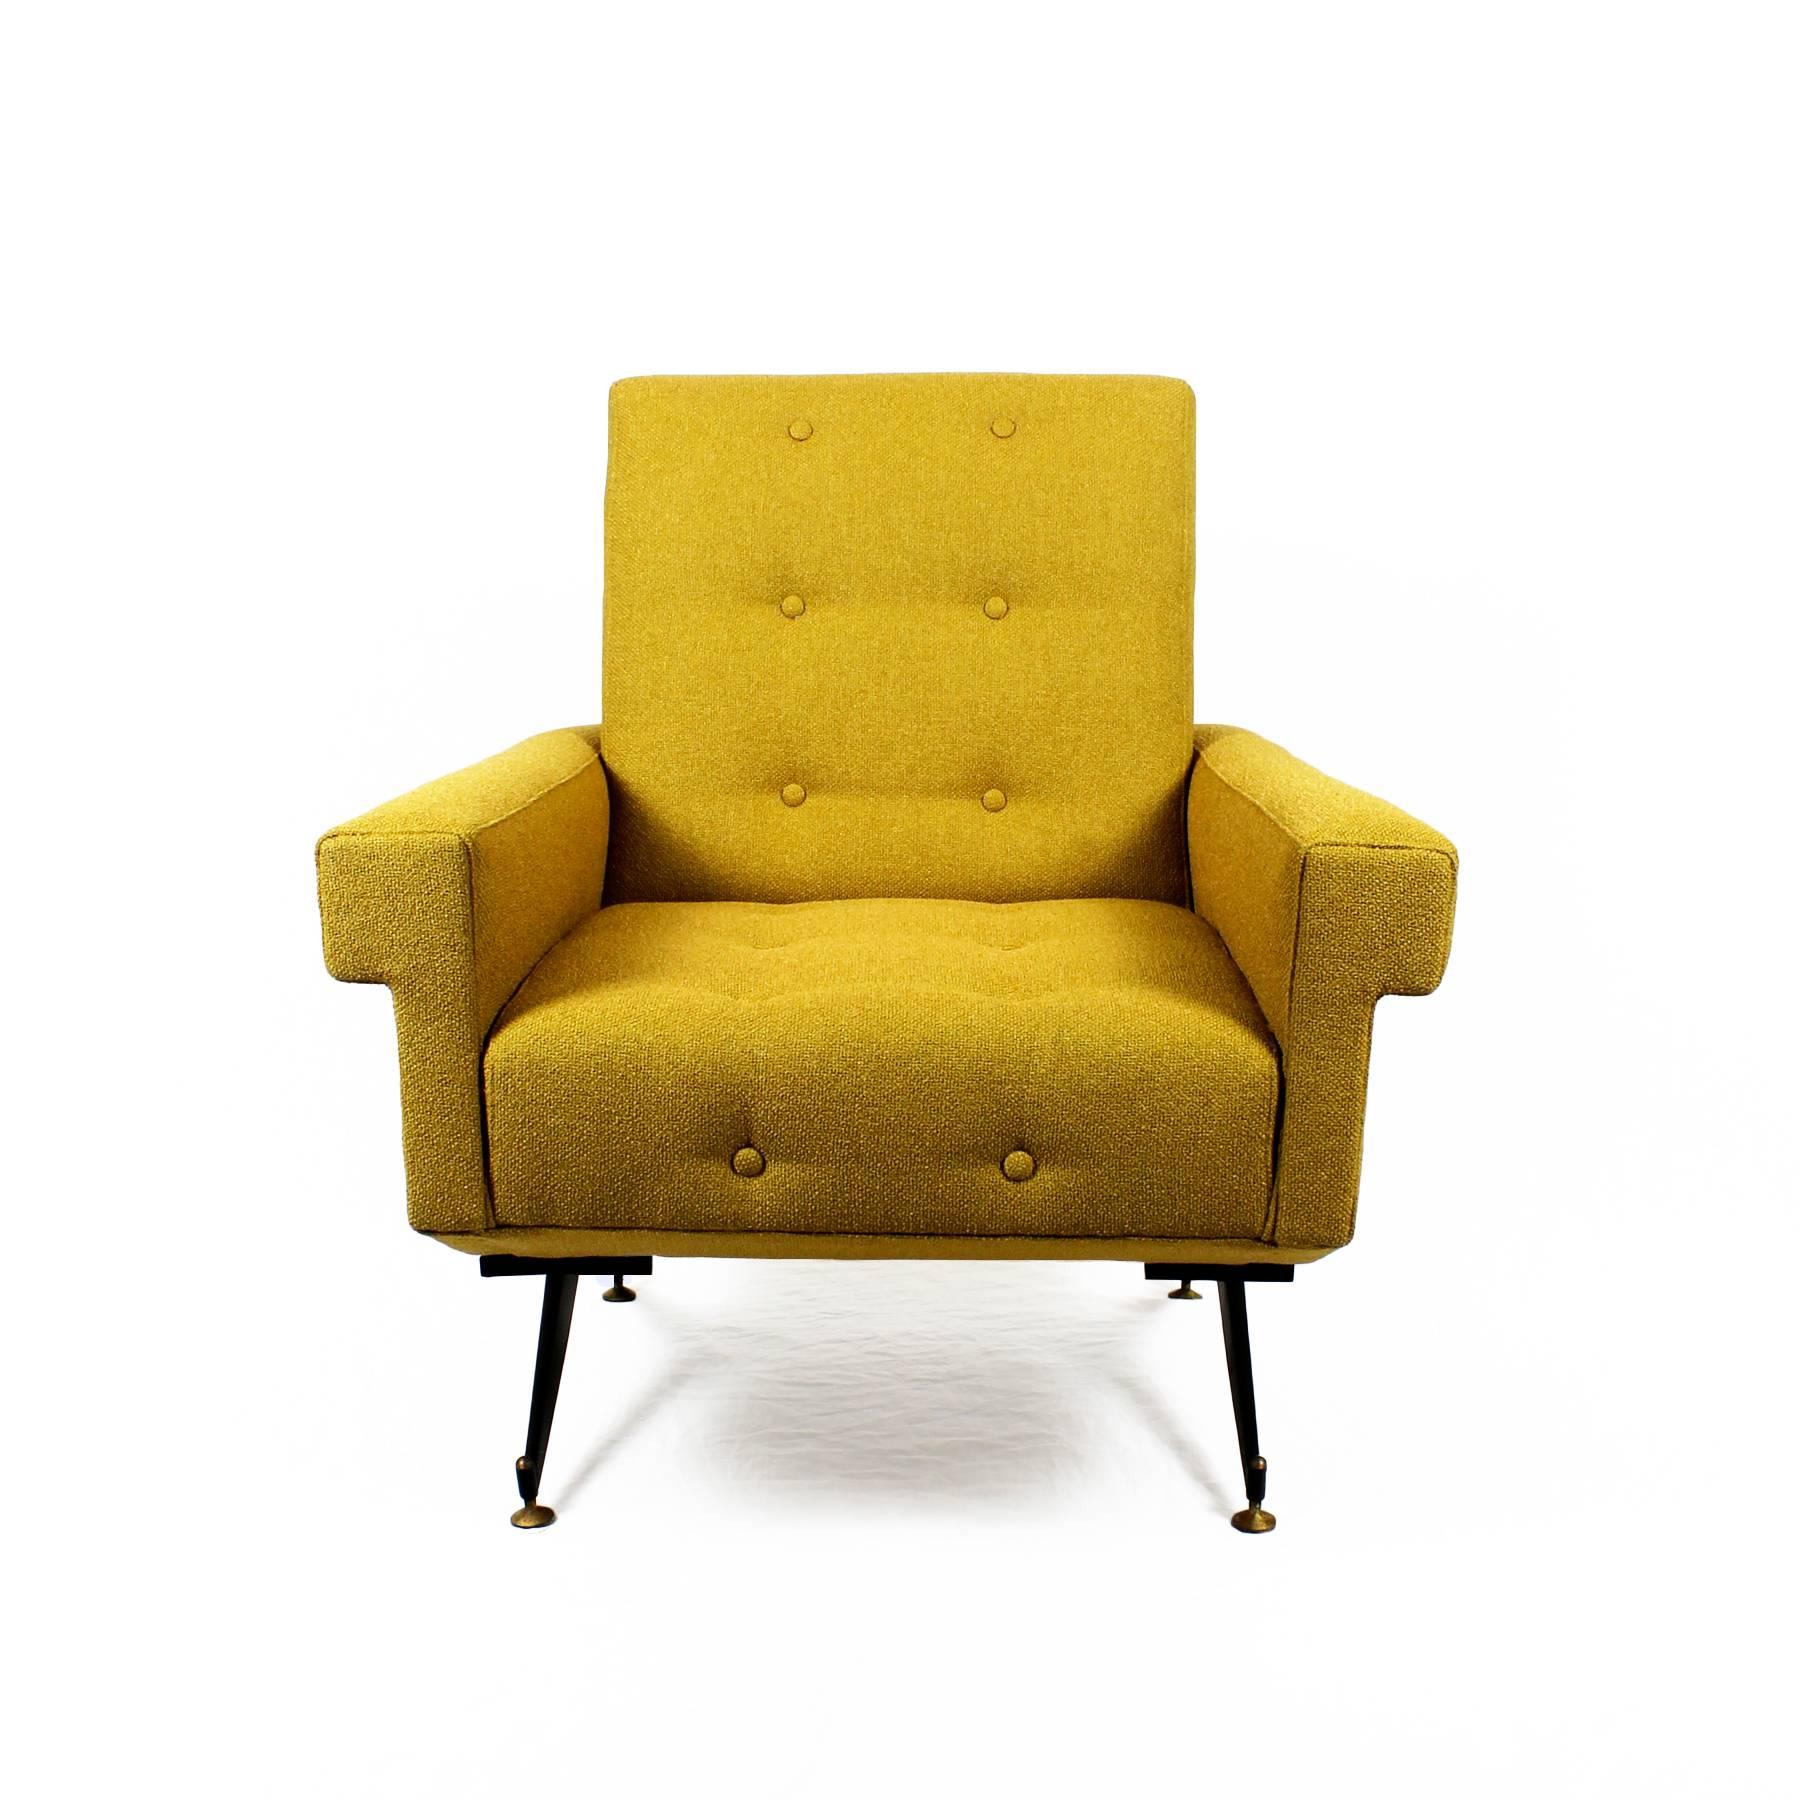 Spectacular pair of armchairs, black steel compas feet with polished brass nuts and bolts. Continuous arms around the back, new padded upholstery in yellow mustard bouclé fabric.

Italy, circa 1960

Measure: Seat height 42 cm.